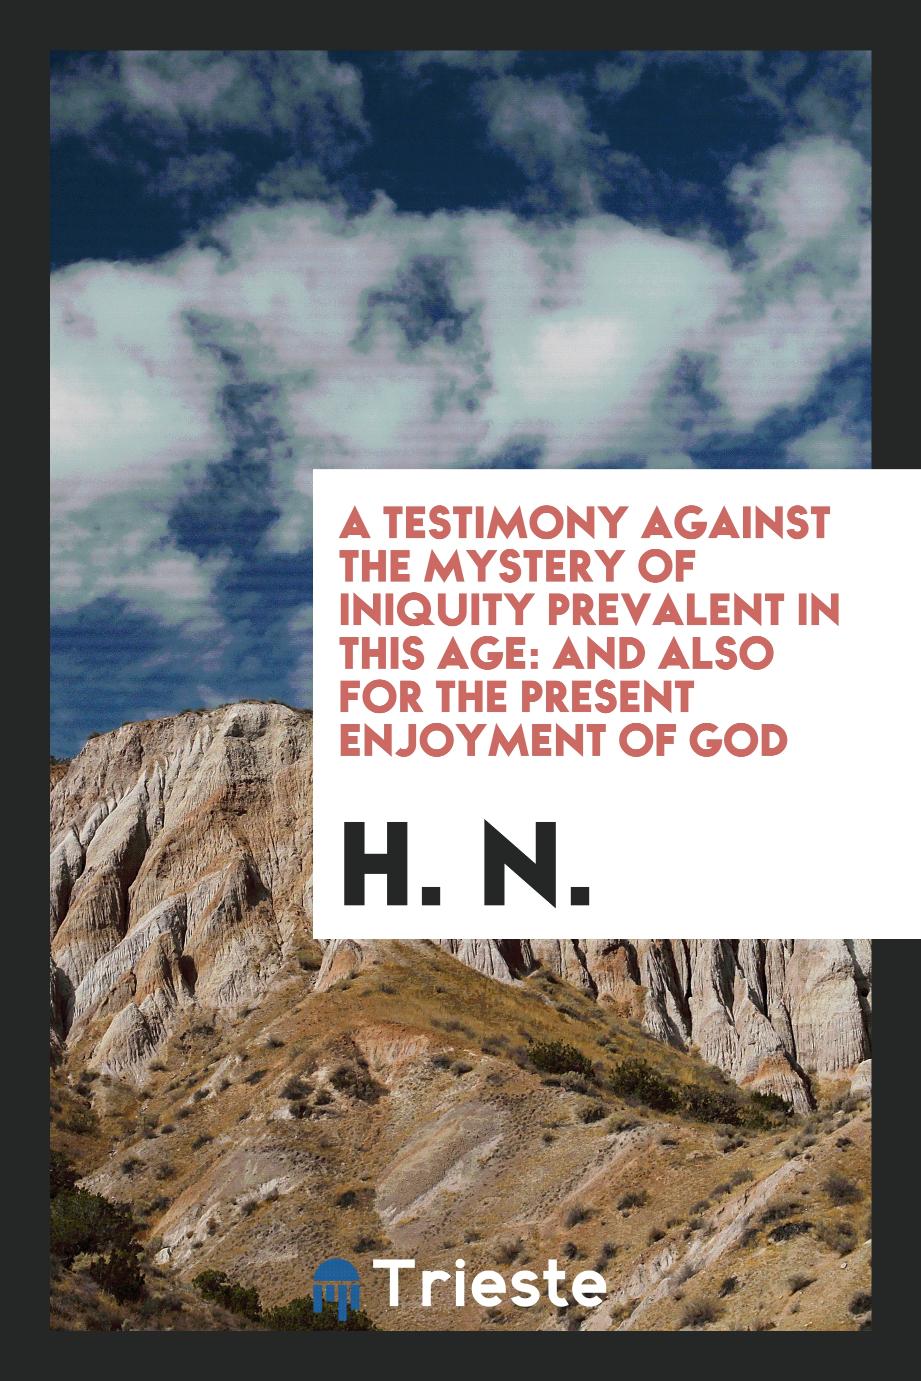 A Testimony Against the Mystery of Iniquity Prevalent in This Age: And Also for the Present Enjoyment of God